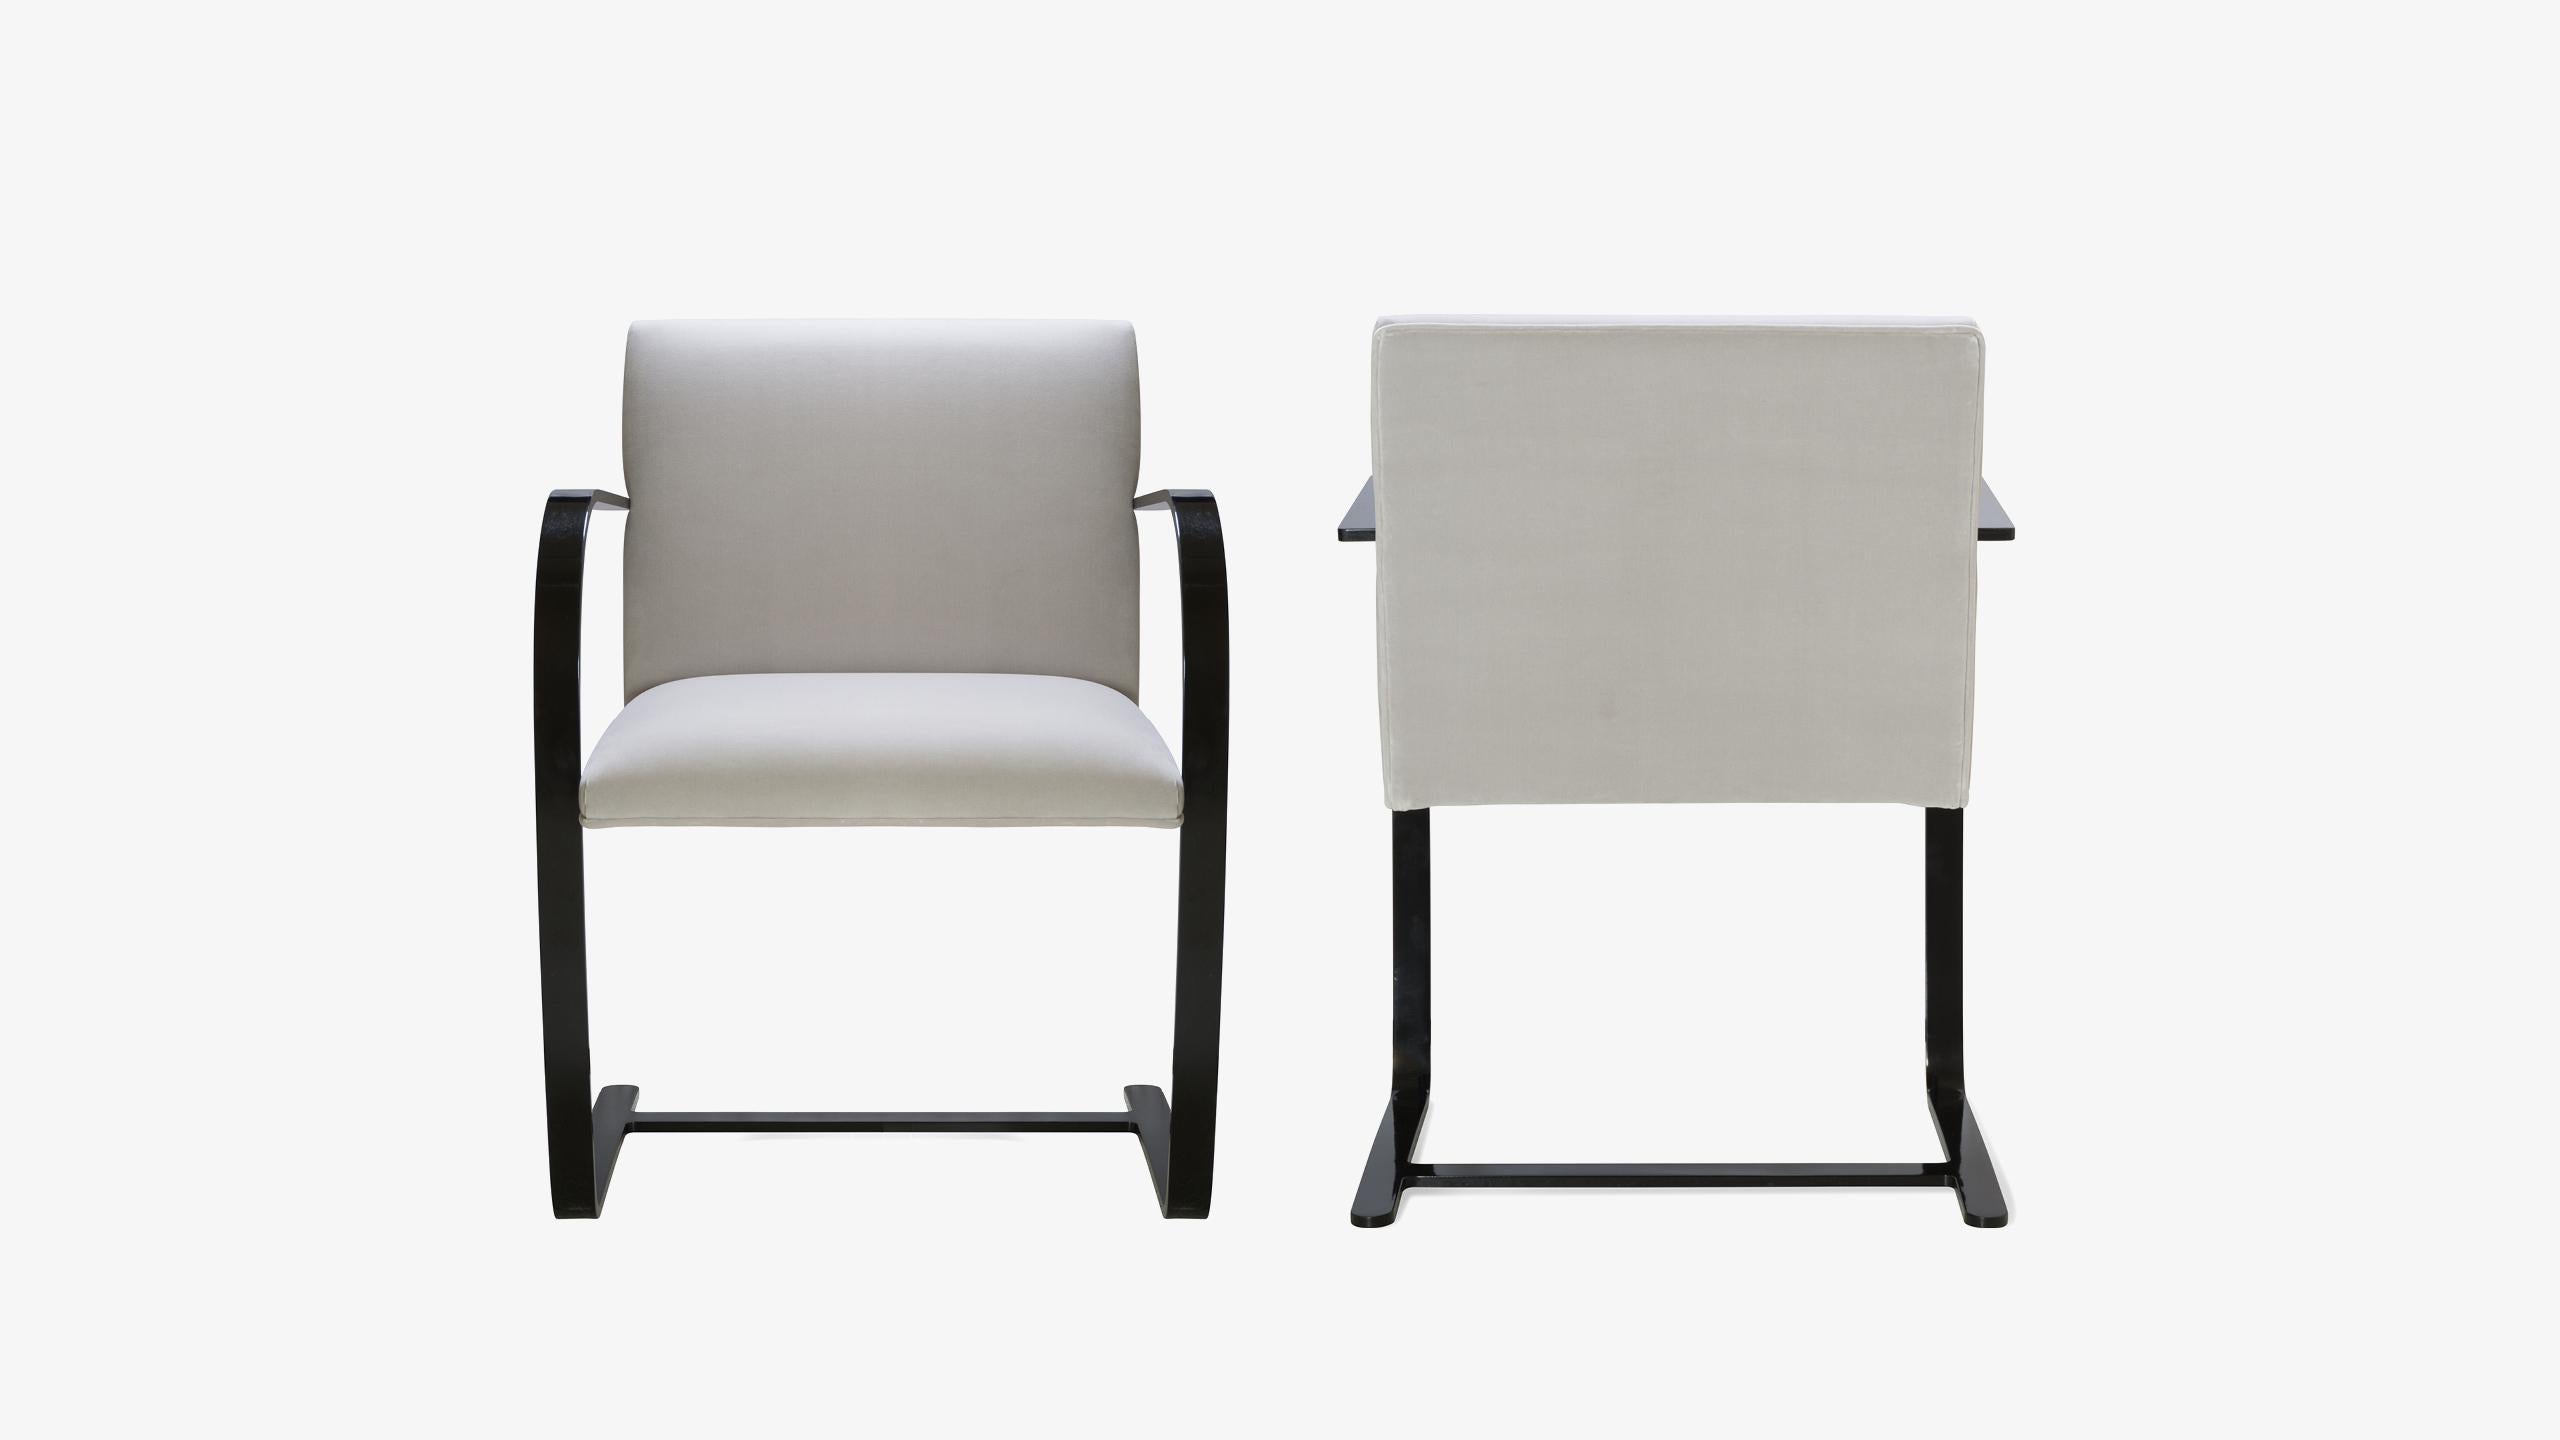 The definition of minimalism in a singular design, achieved by the great Ludwig Mies van der Rohe in 1929; the Brno flat-bar chair is just that. We have edited these contemporary iteration authentic originals in a way that’s never been done